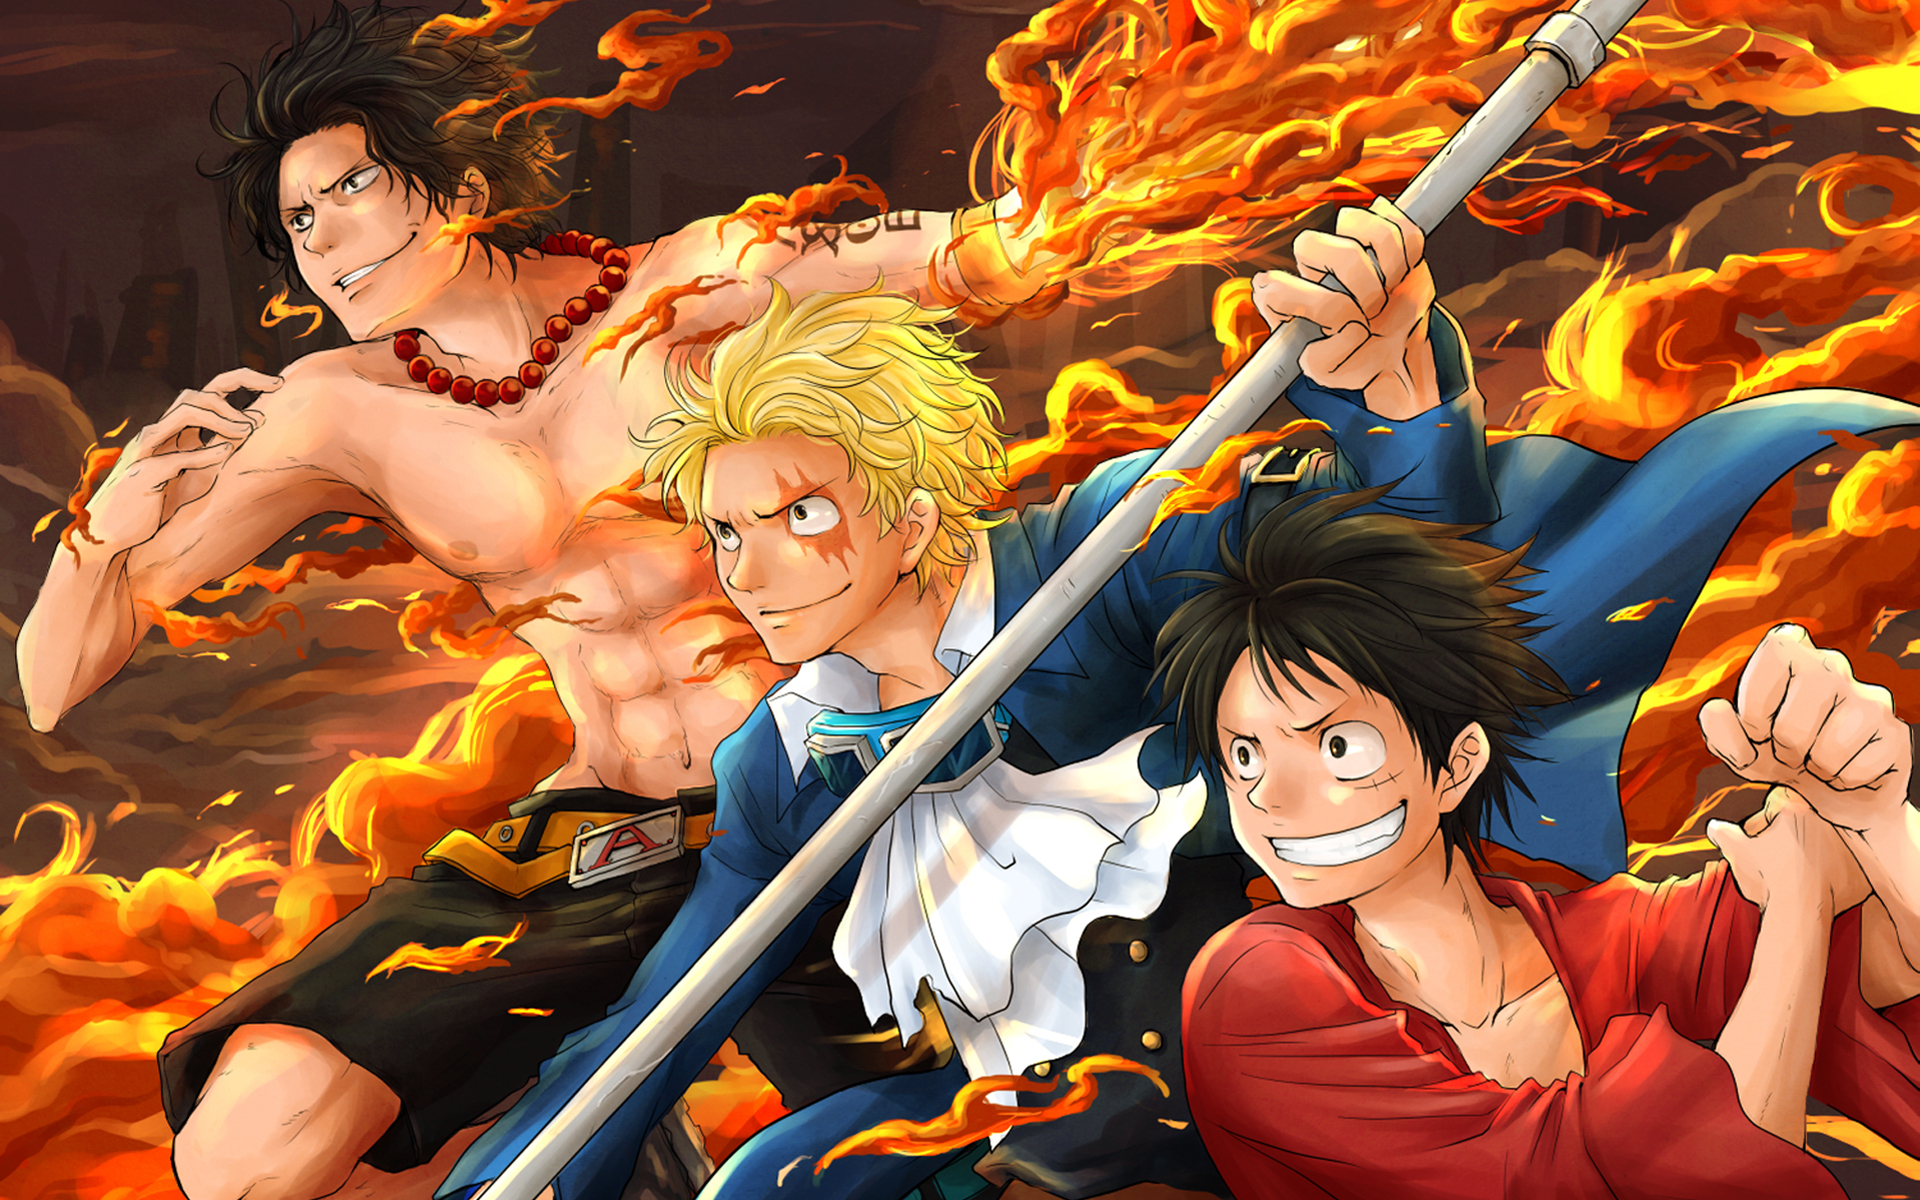 1920x1200 3600+ Anime One Piece HD Wallpapers and Backgrounds